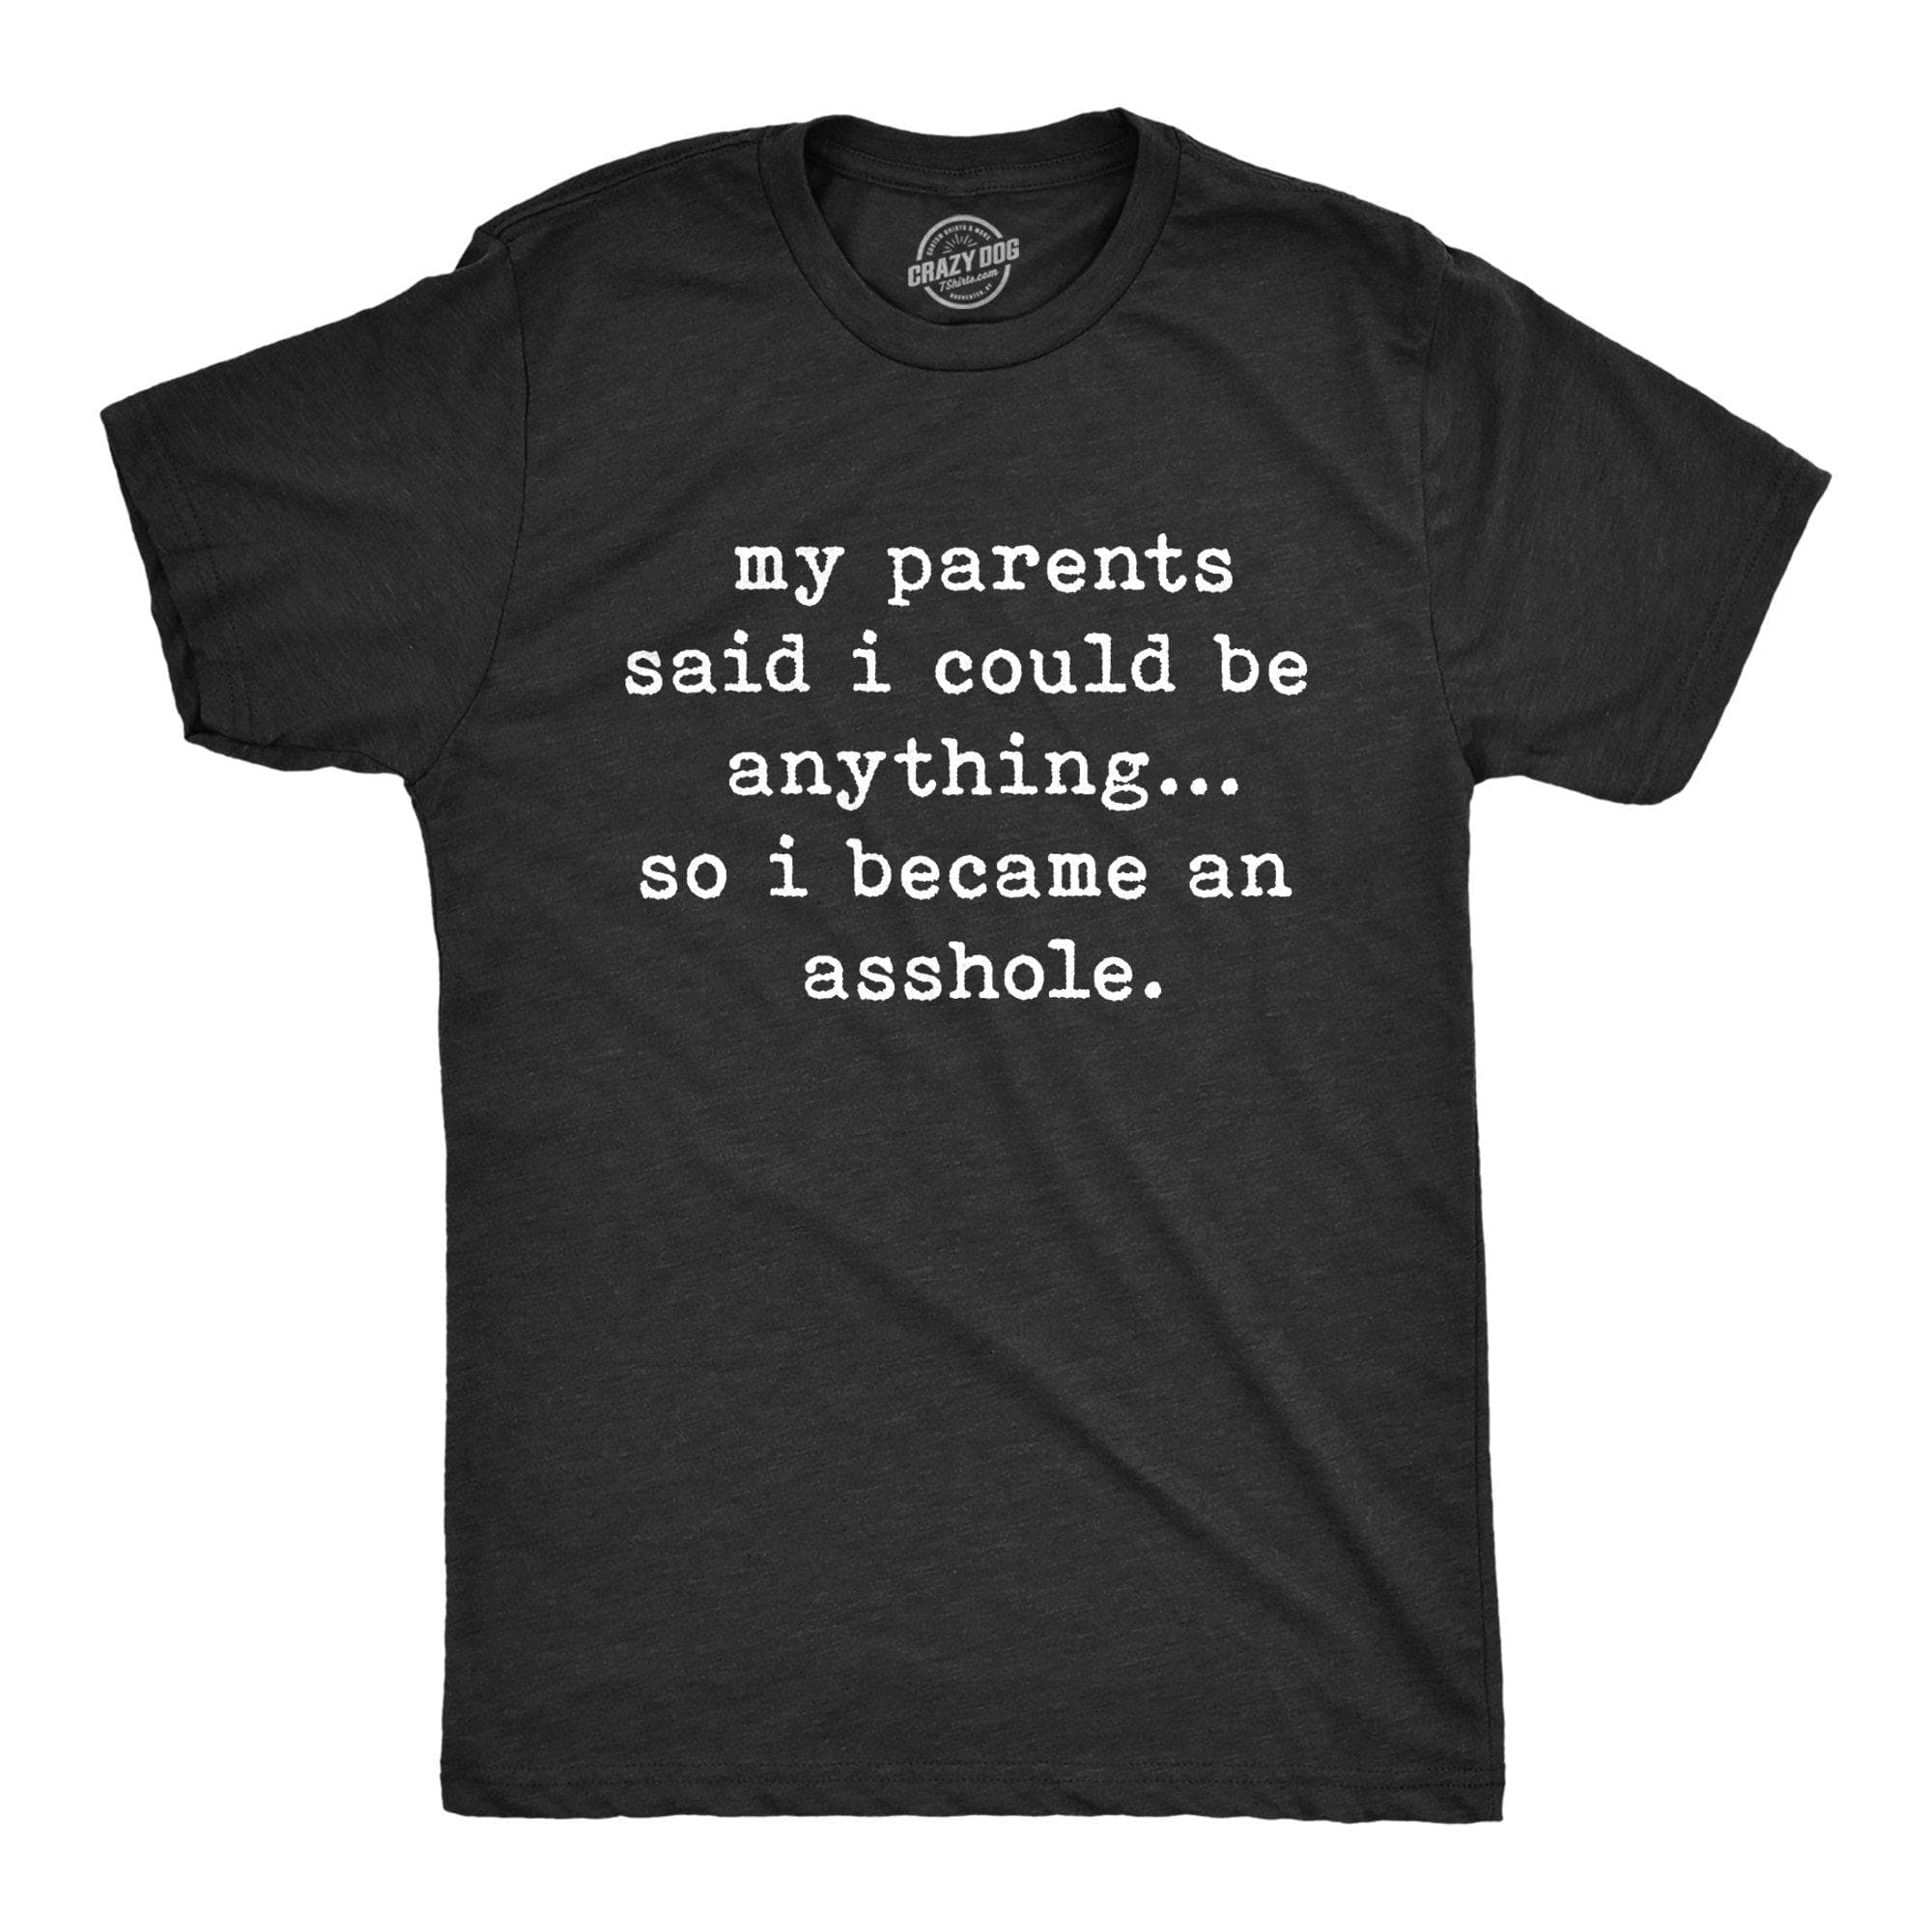 My Parents Said I Could Be Anything So I Became An Asshole Men's Tshirt - Crazy Dog T-Shirts